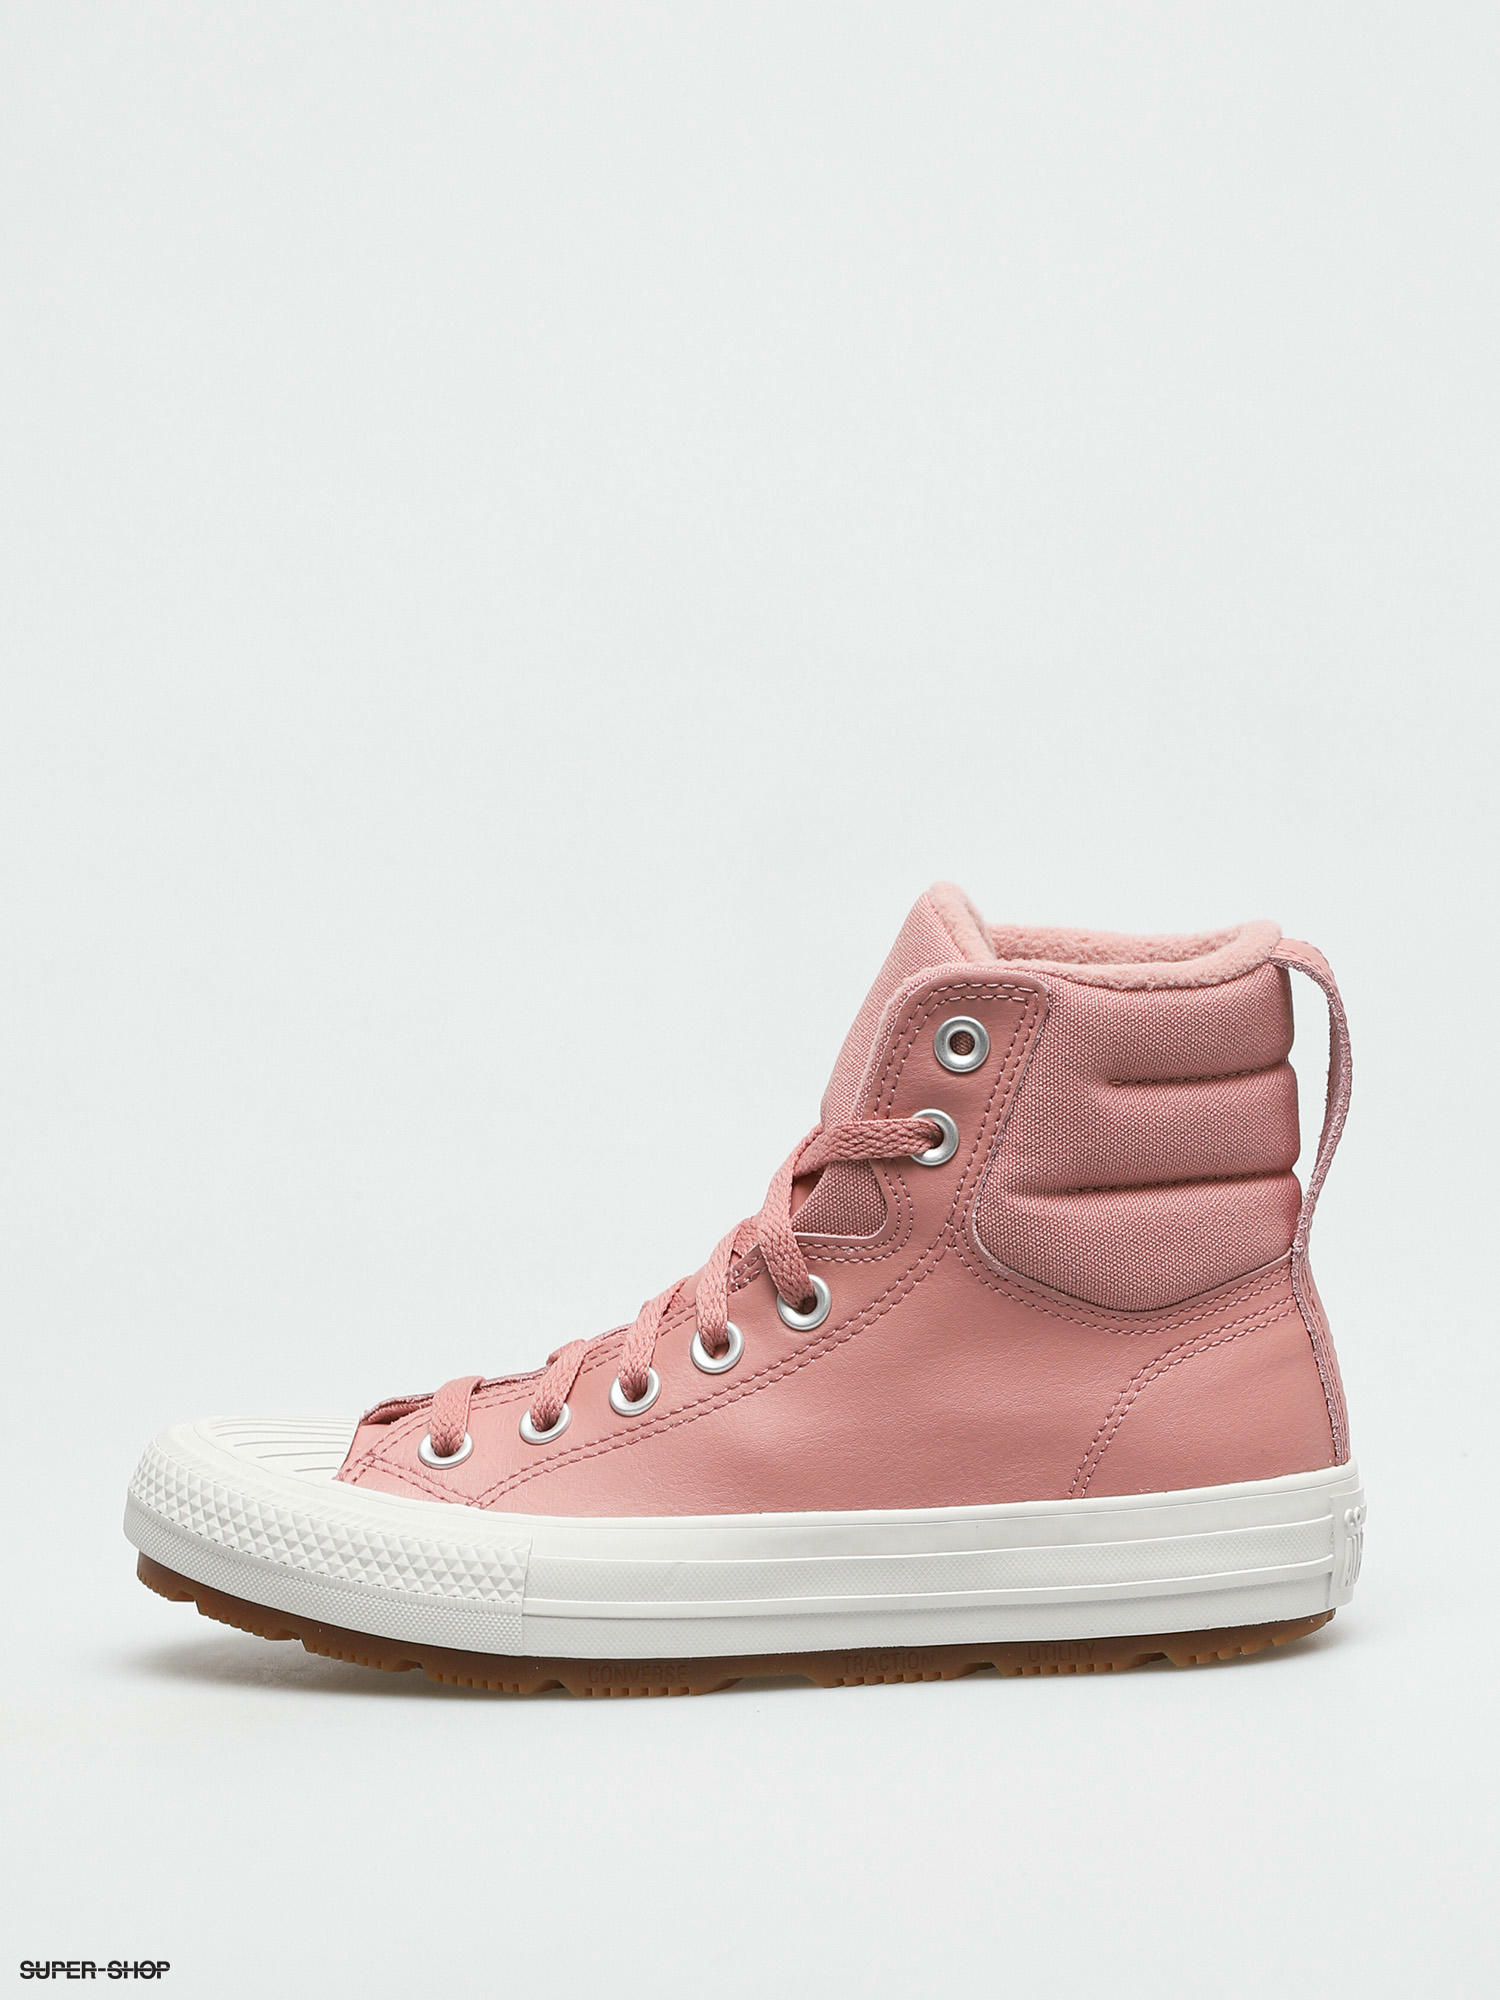 converse all star hi leather baby pink